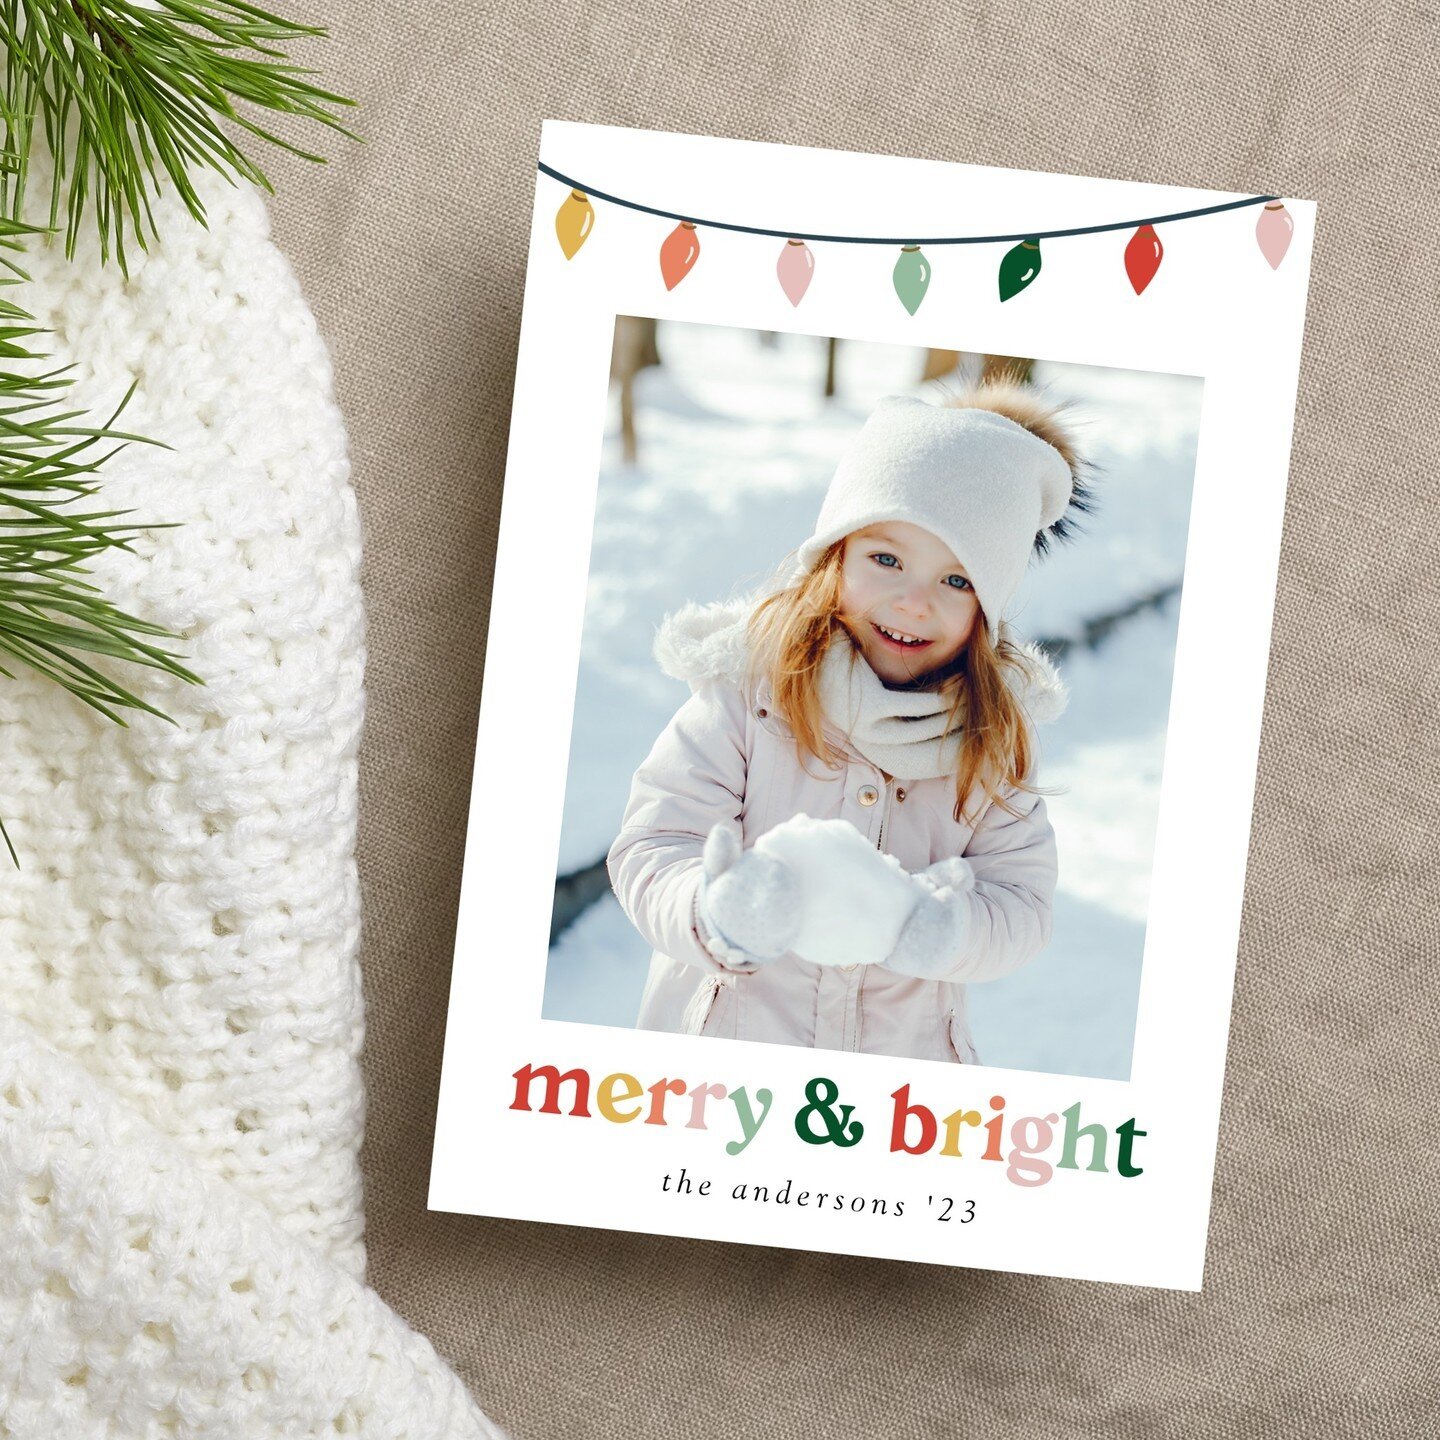 Our Modern Merry and Bright holiday collection is full of brightly colored holiday cards, stickers, gift tags, and more! It's never too early to get started on your holiday shopping. Christmas will be here before we know it. Link in bio!